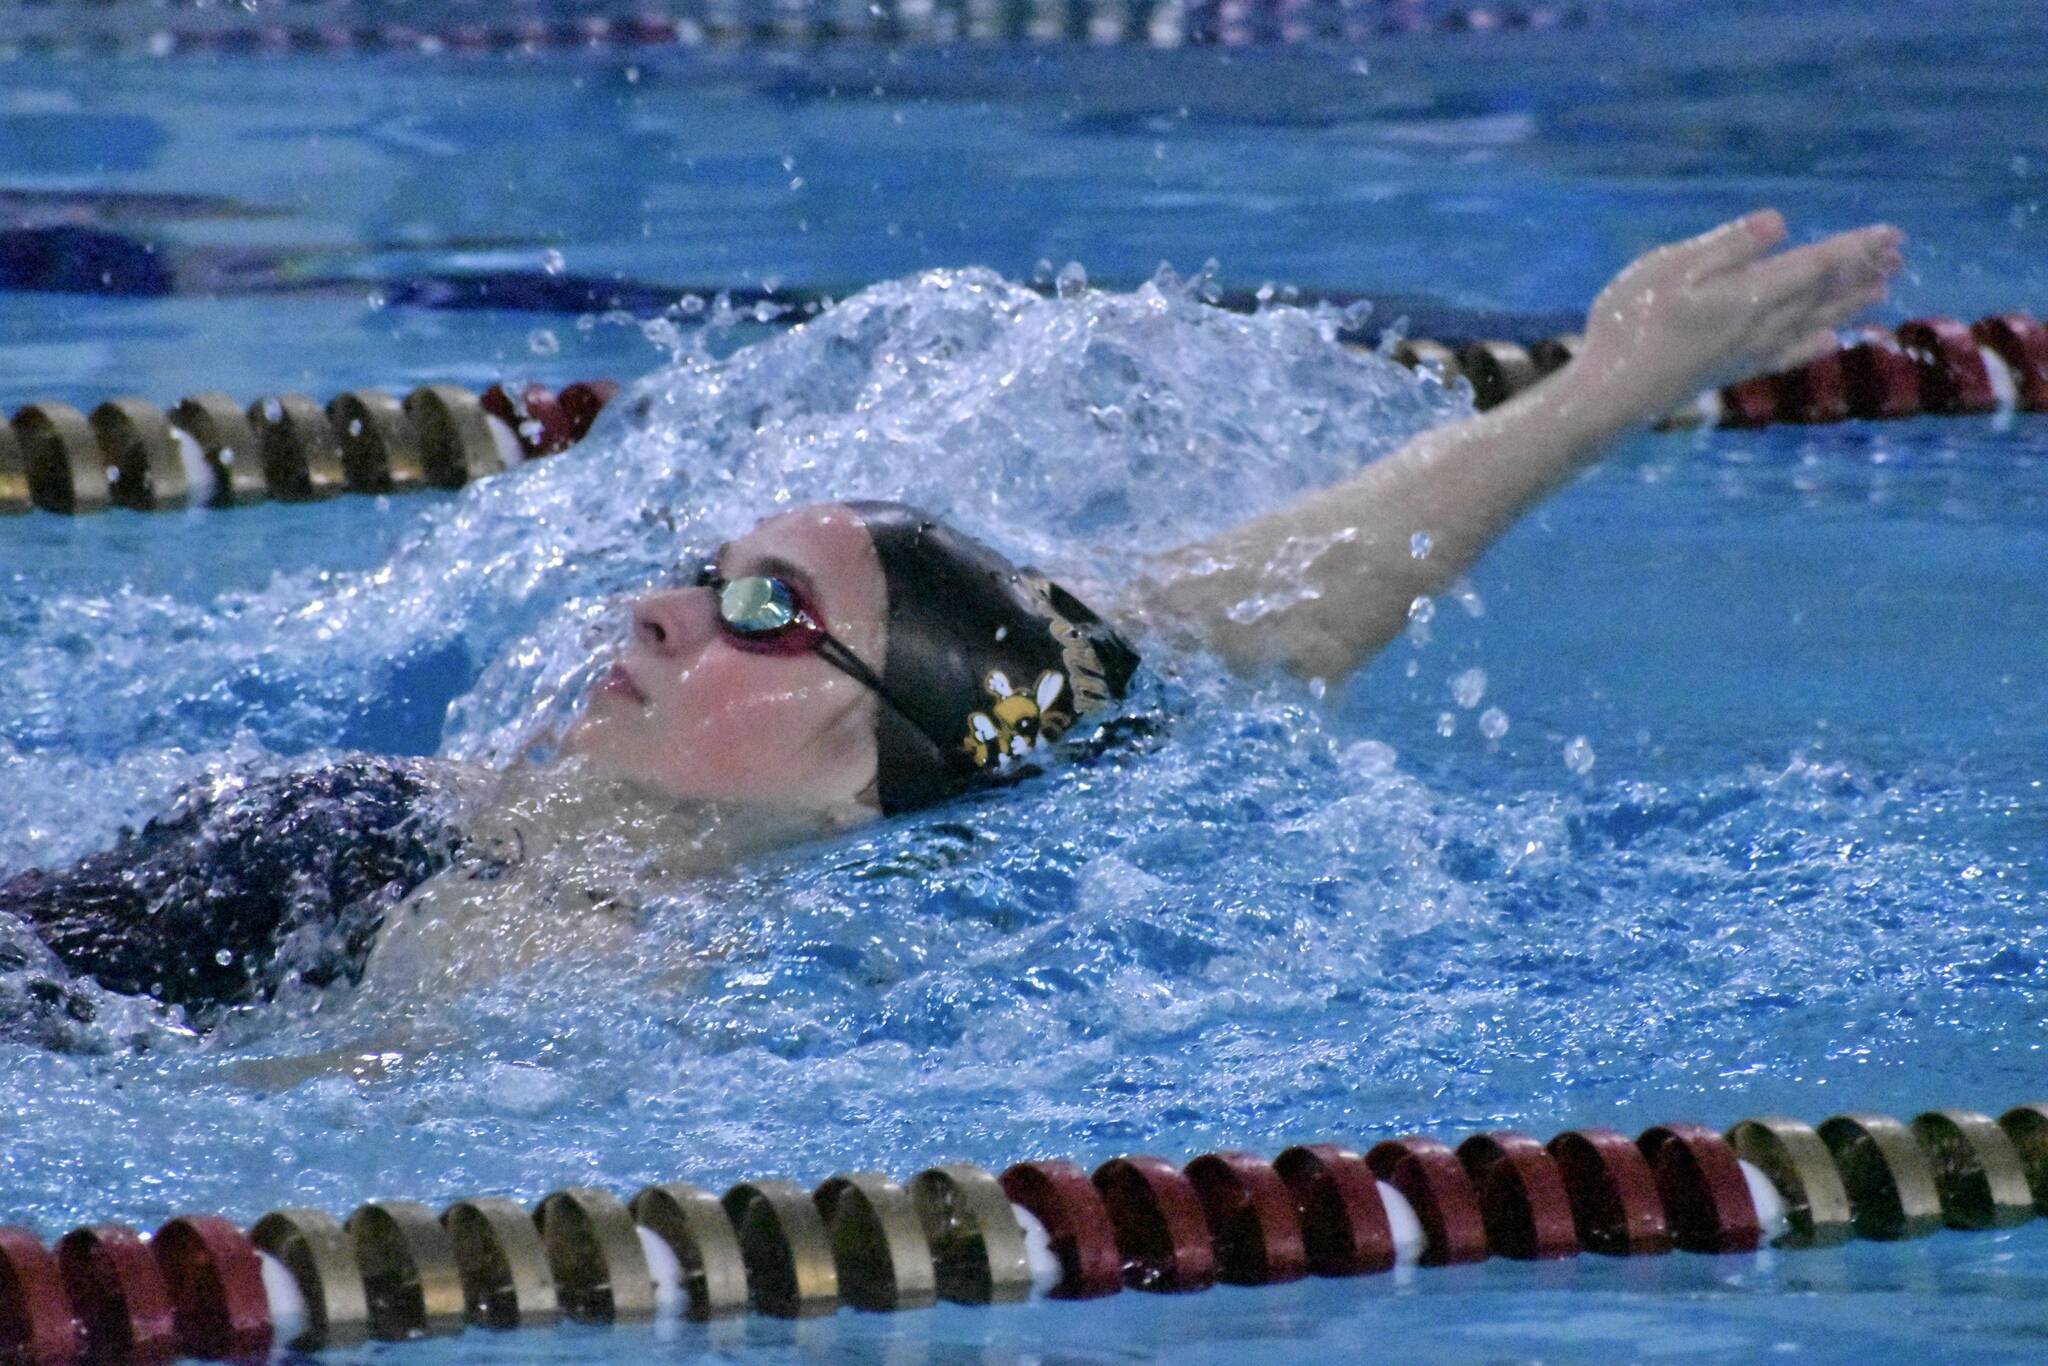 PHOTO BY KEVIN HANSON Cheyenne Fessler has been a steady presence on the local high school swim scene. She’s a member of a combined Enumclaw/White River program that turns out together and competes together, but is scored separately during meets. Fessler, a White River High sophomore, is shown competing in the backstroke earlier this season during a meet at the Enumclaw Aquatic Center.